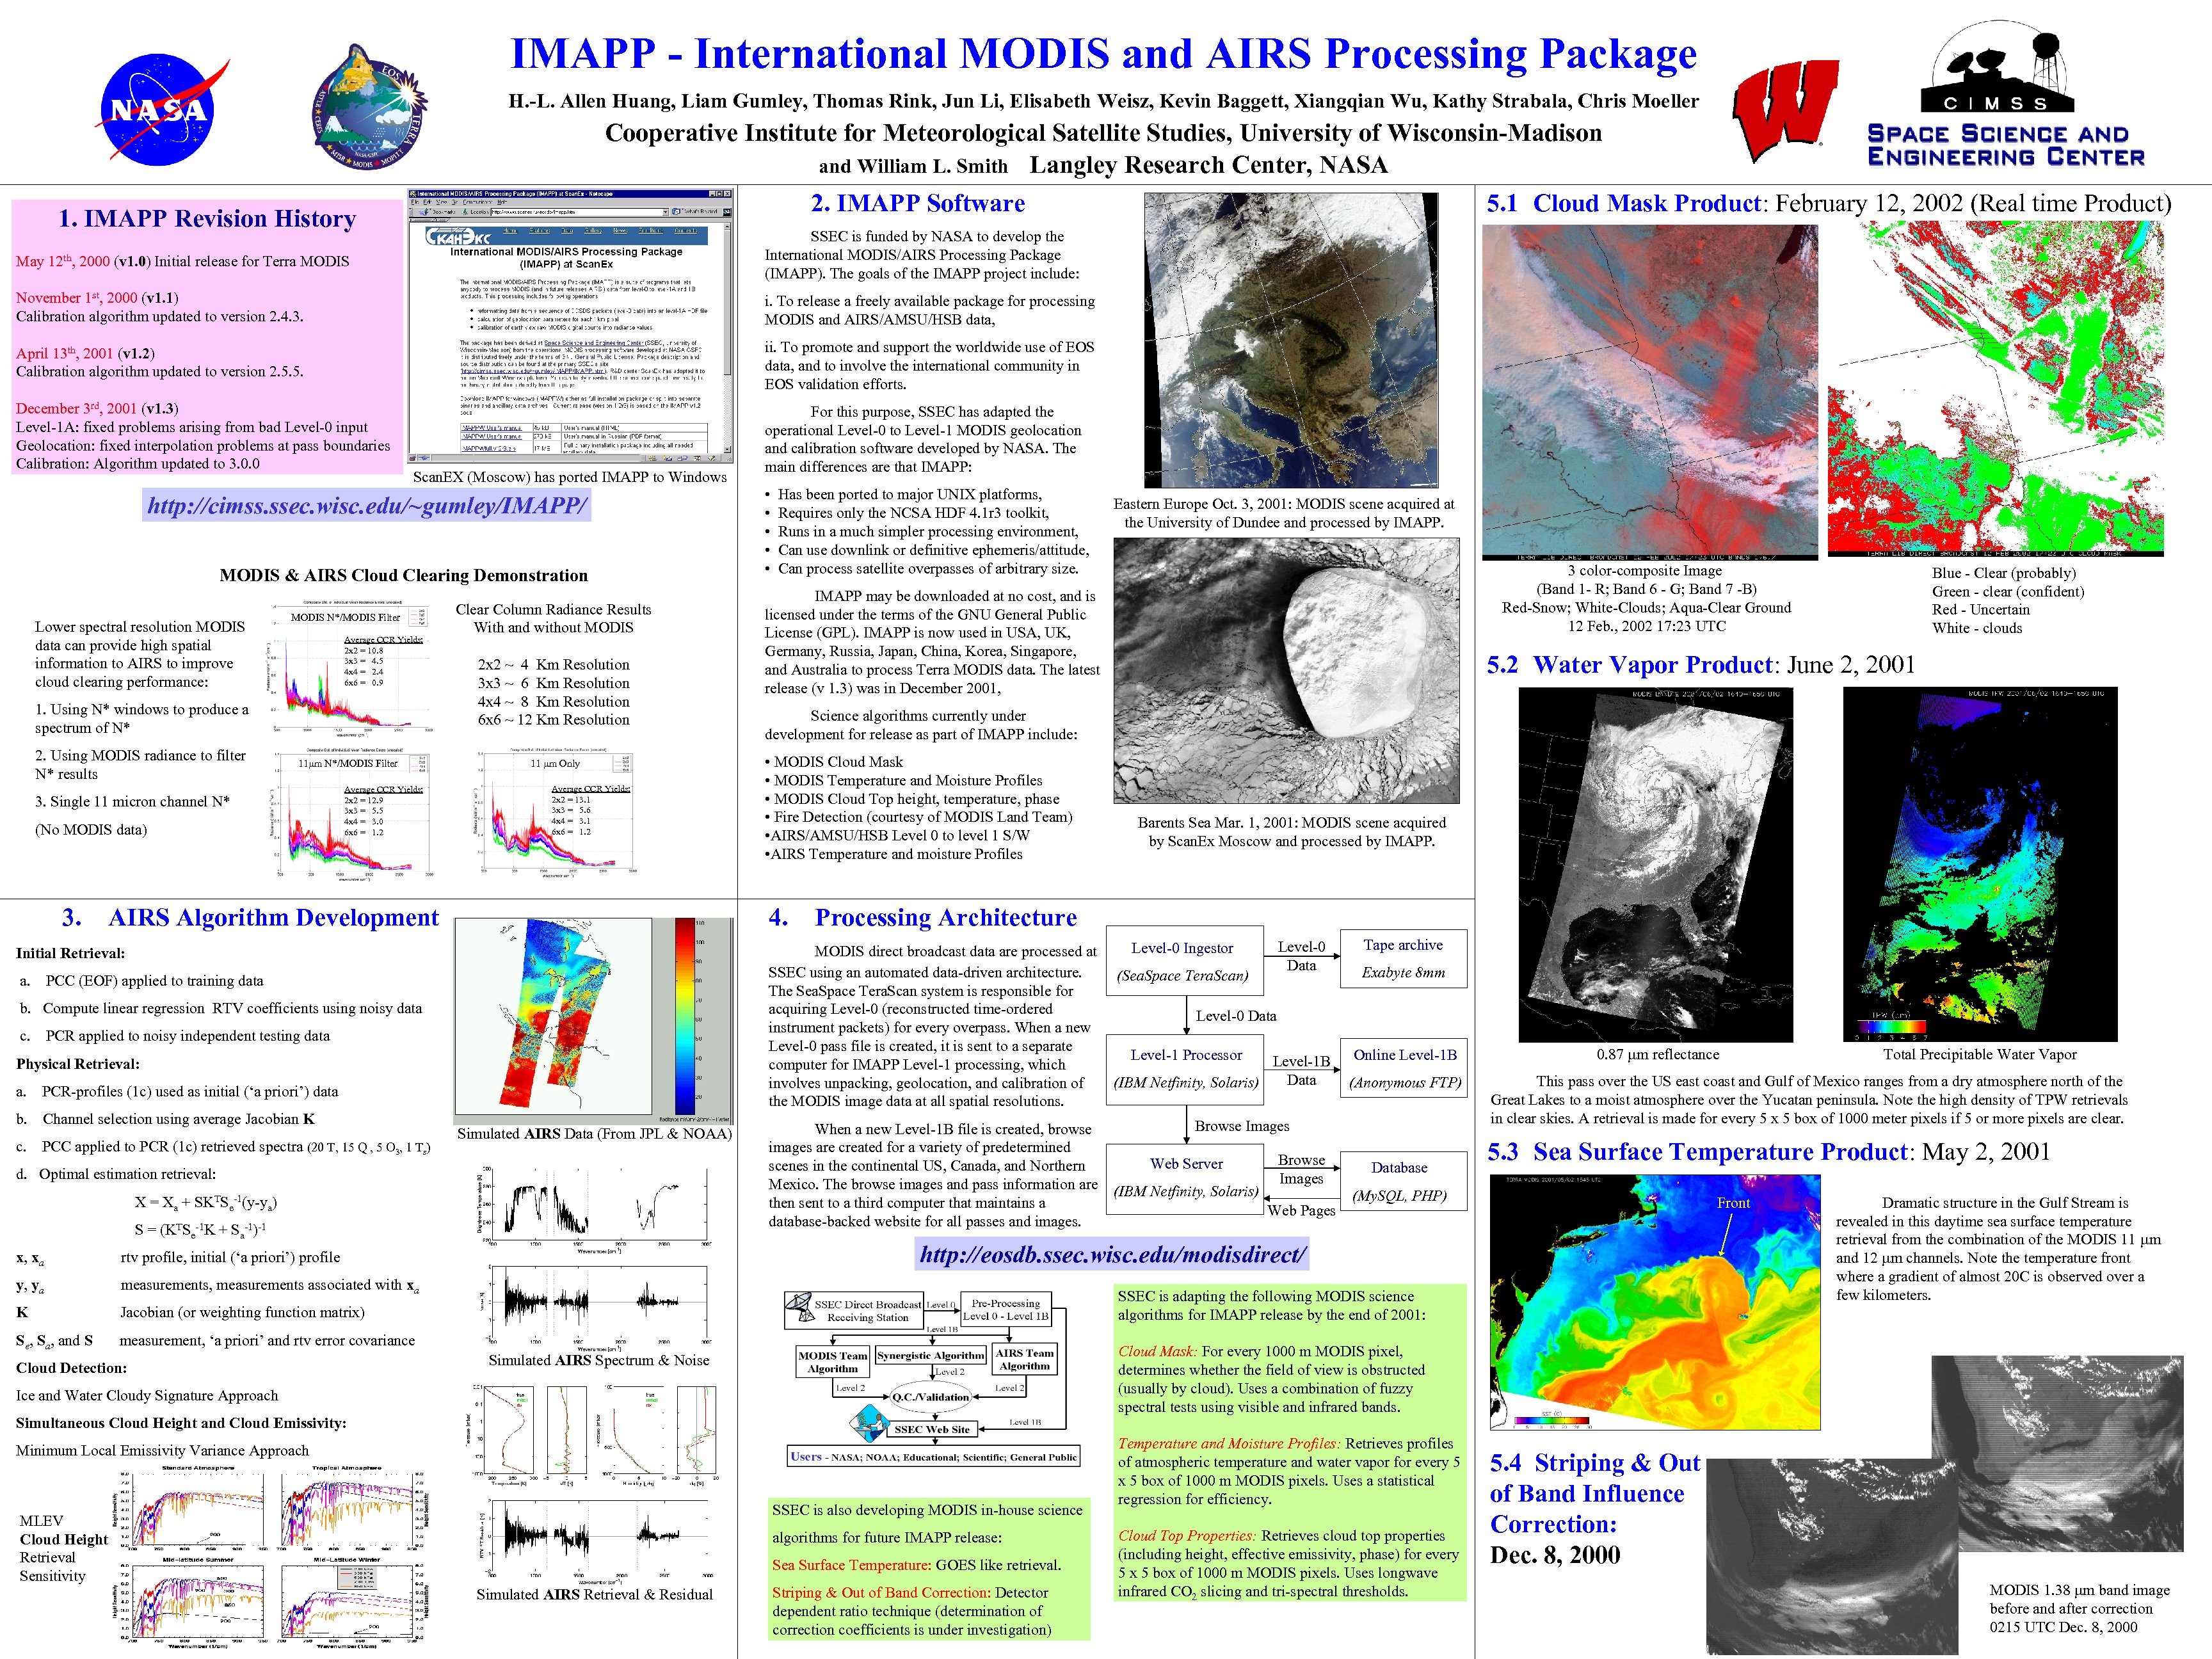 IMAPP - International MODIS and AIRS Processing Package H. -L. Allen Huang, Liam Gumley,